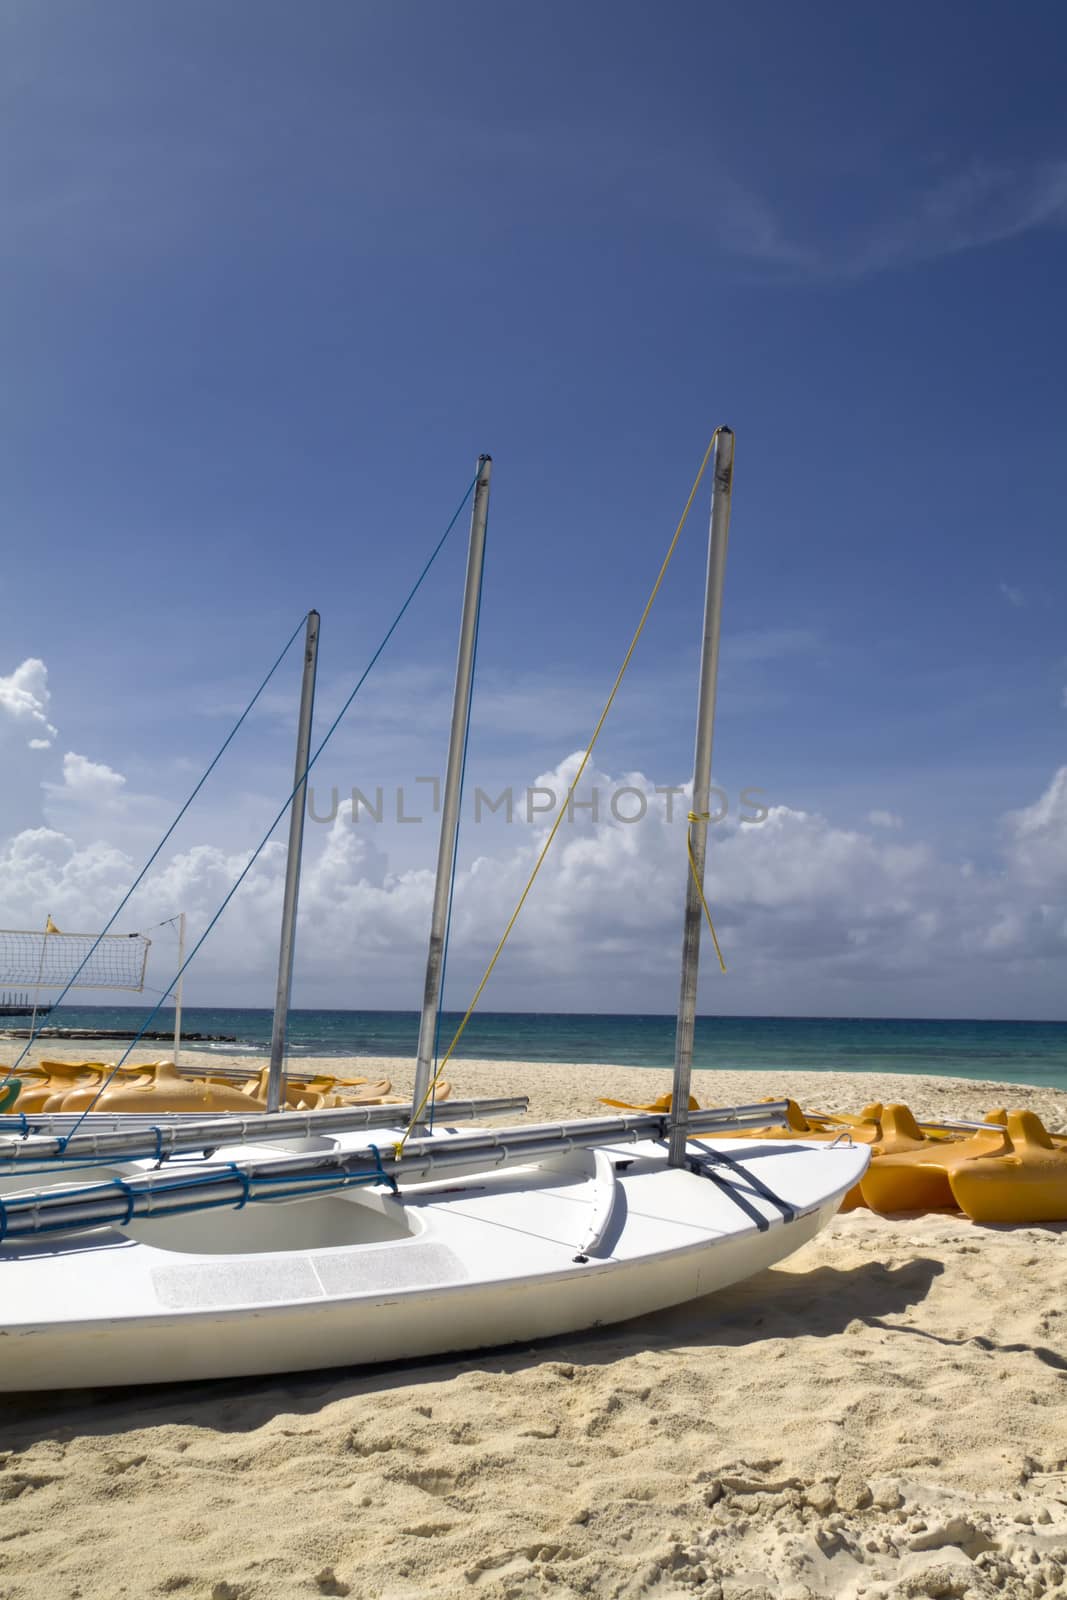 A personal sail boat on the beach by the ocean